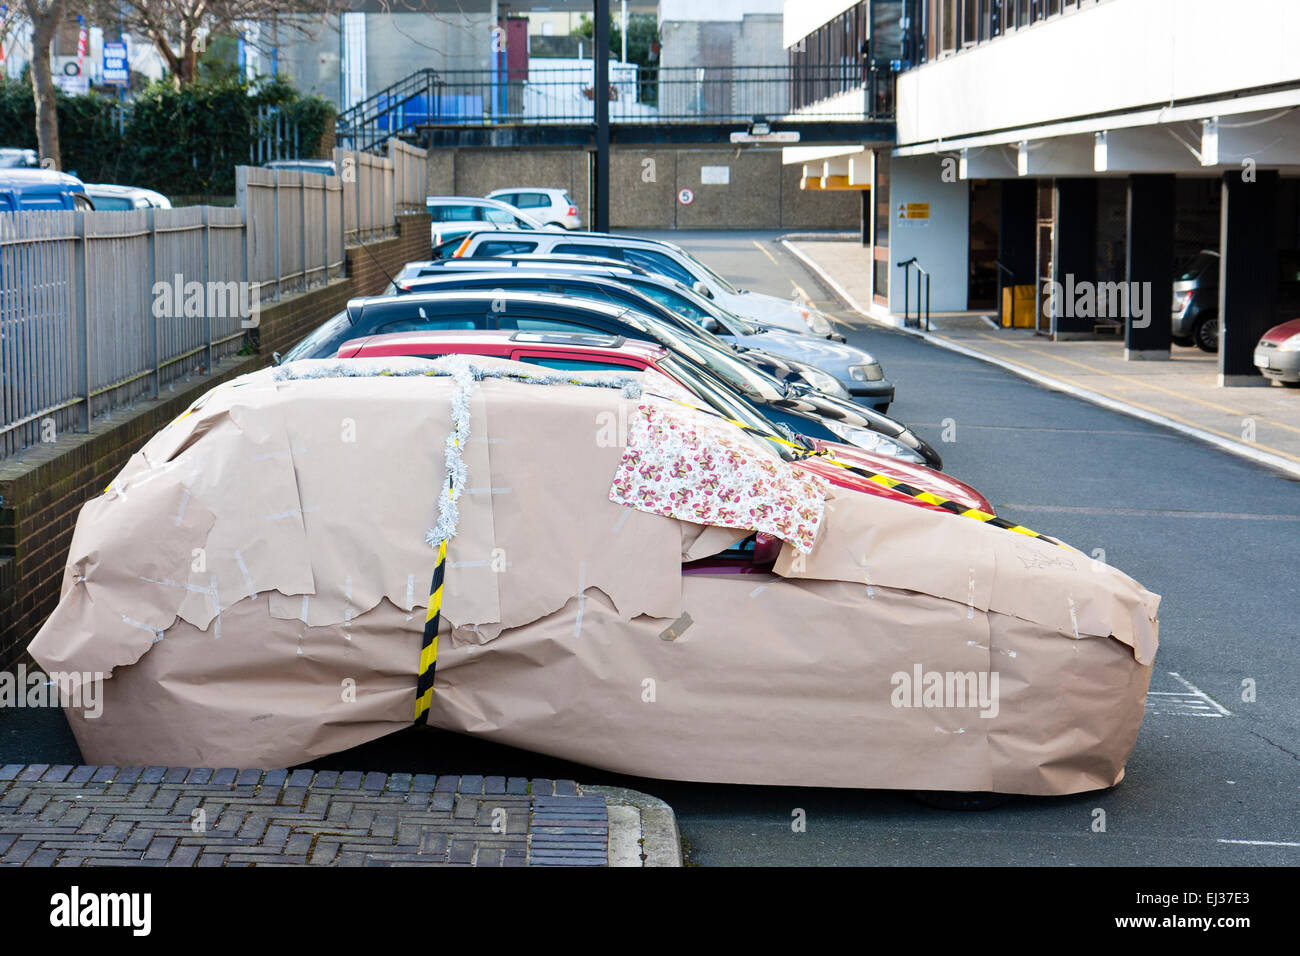 A car wrapped up in brown wrapping paper and black and yellow tape as a surprise secret Santa gift, parked in a car park. Stock Photo